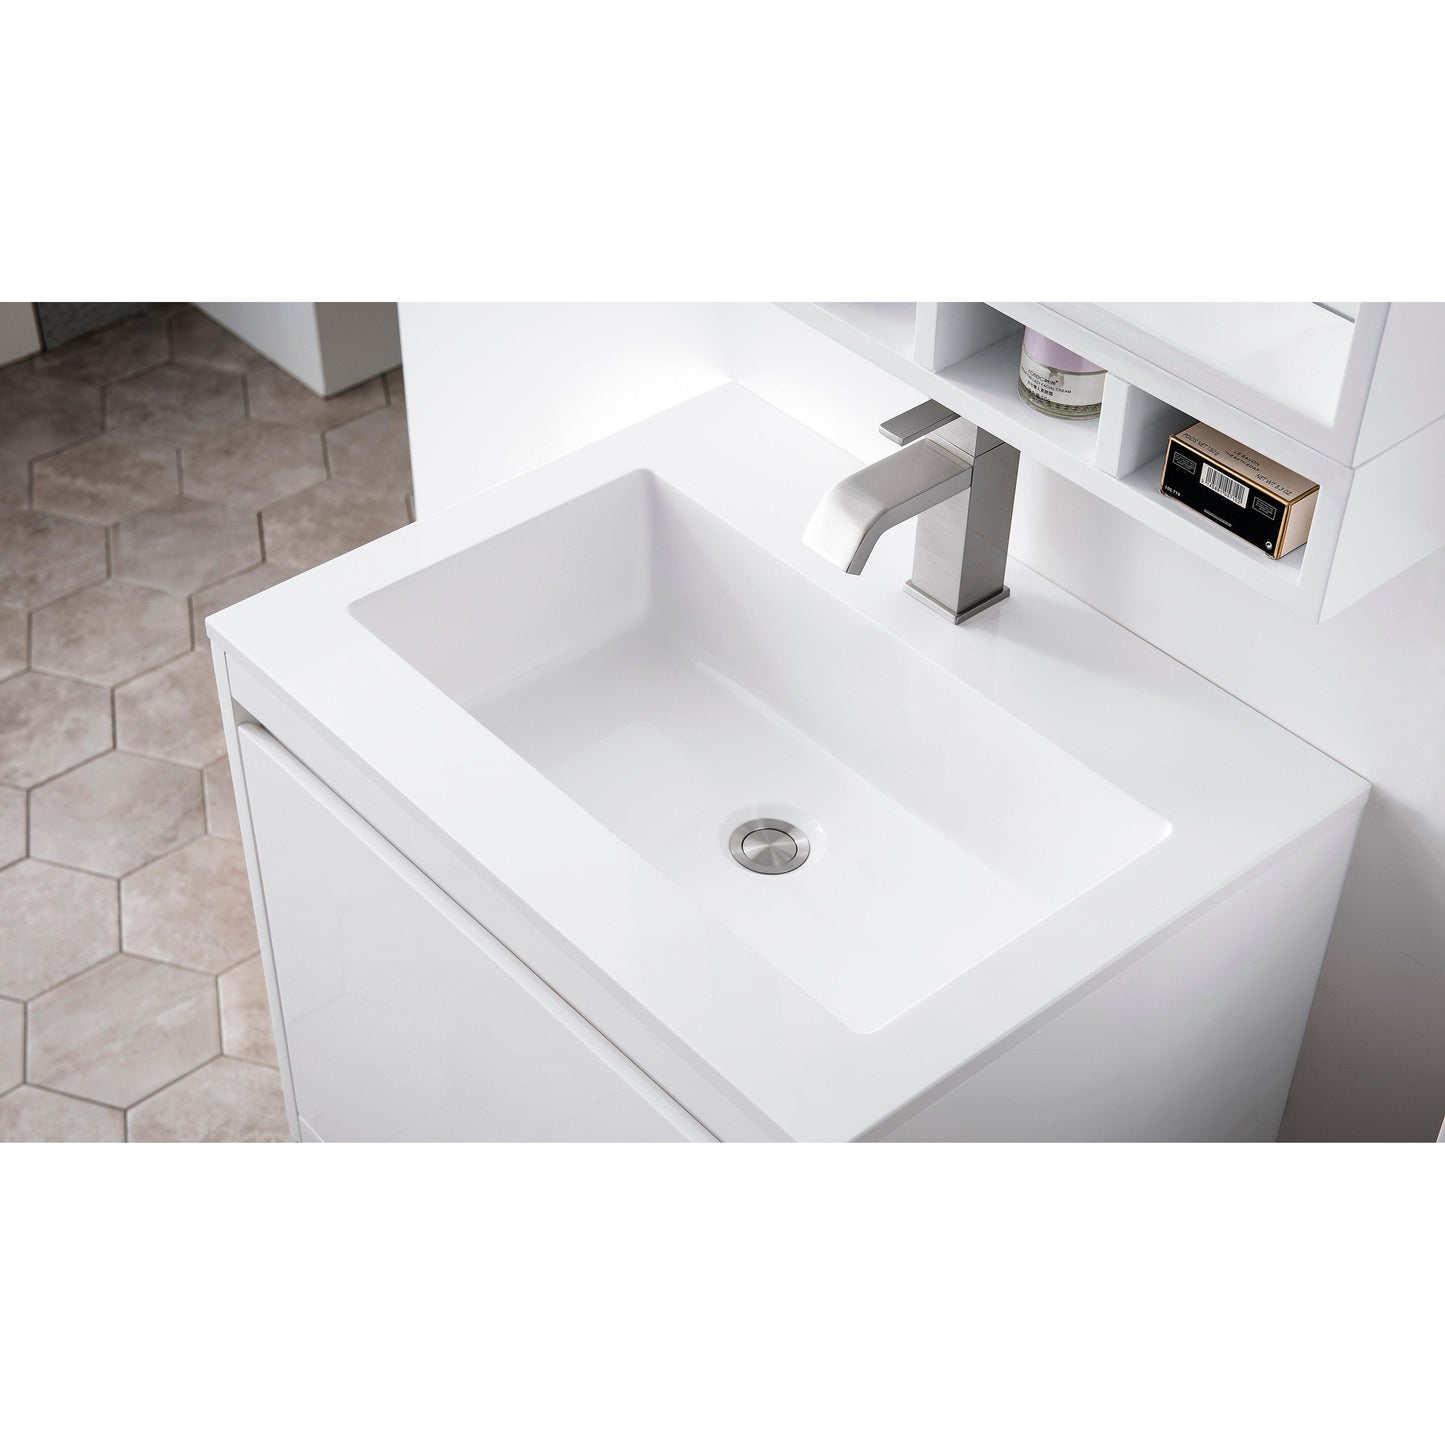 James Martin Vanities Milan 23.6" Glossy White, Matte Black Single Vanity Cabinet With Glossy White Composite Top